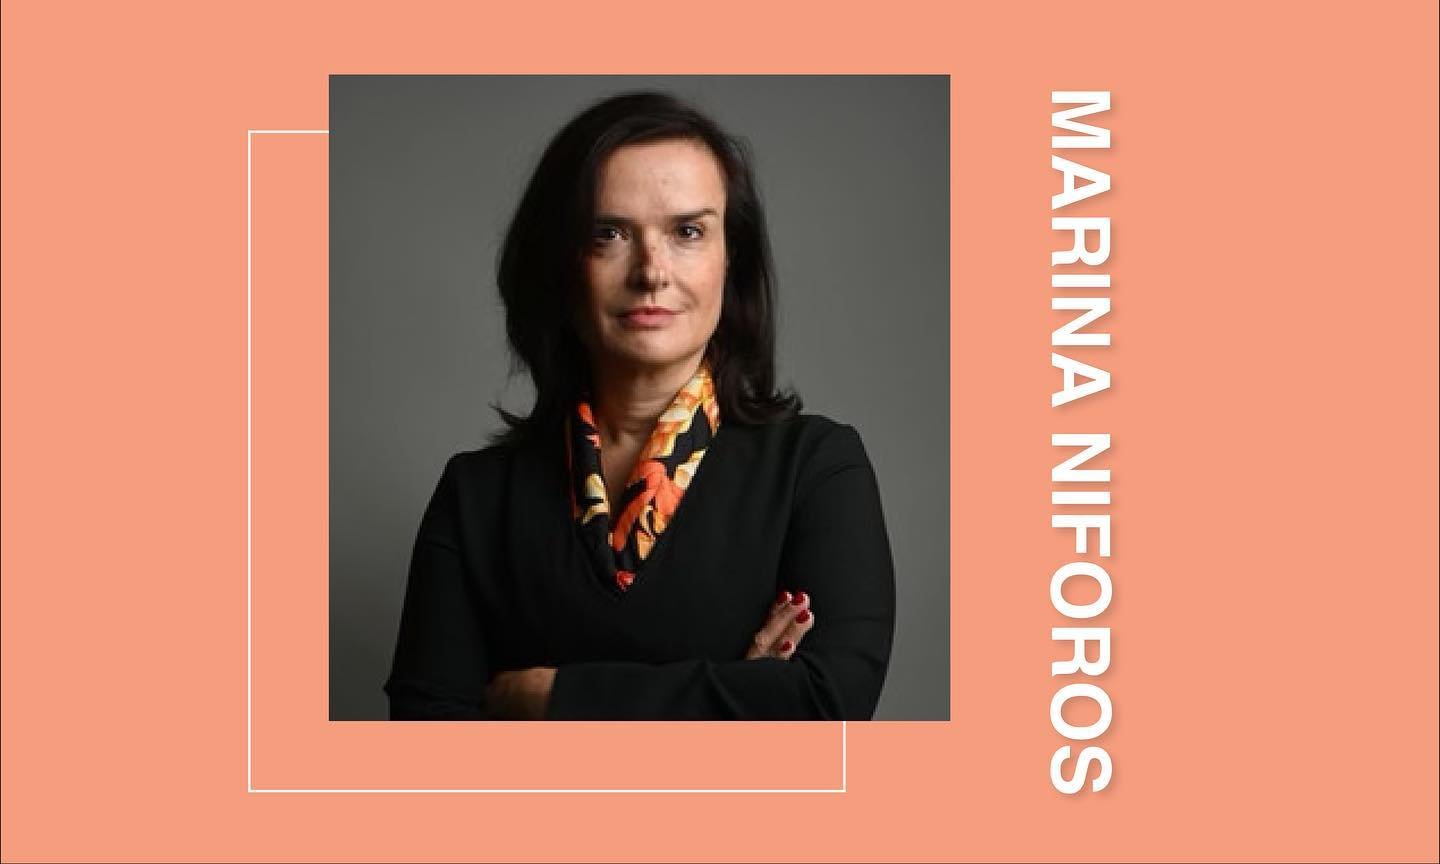 &ldquo;Some may call it resilience, other ambidexterity, but, ultimately, I think the essential ingredient is the capacity to anticipate and navigate change that is so important in today&rsquo;s turbulent times.&rdquo; - Marina Niforos

Marina Niforo